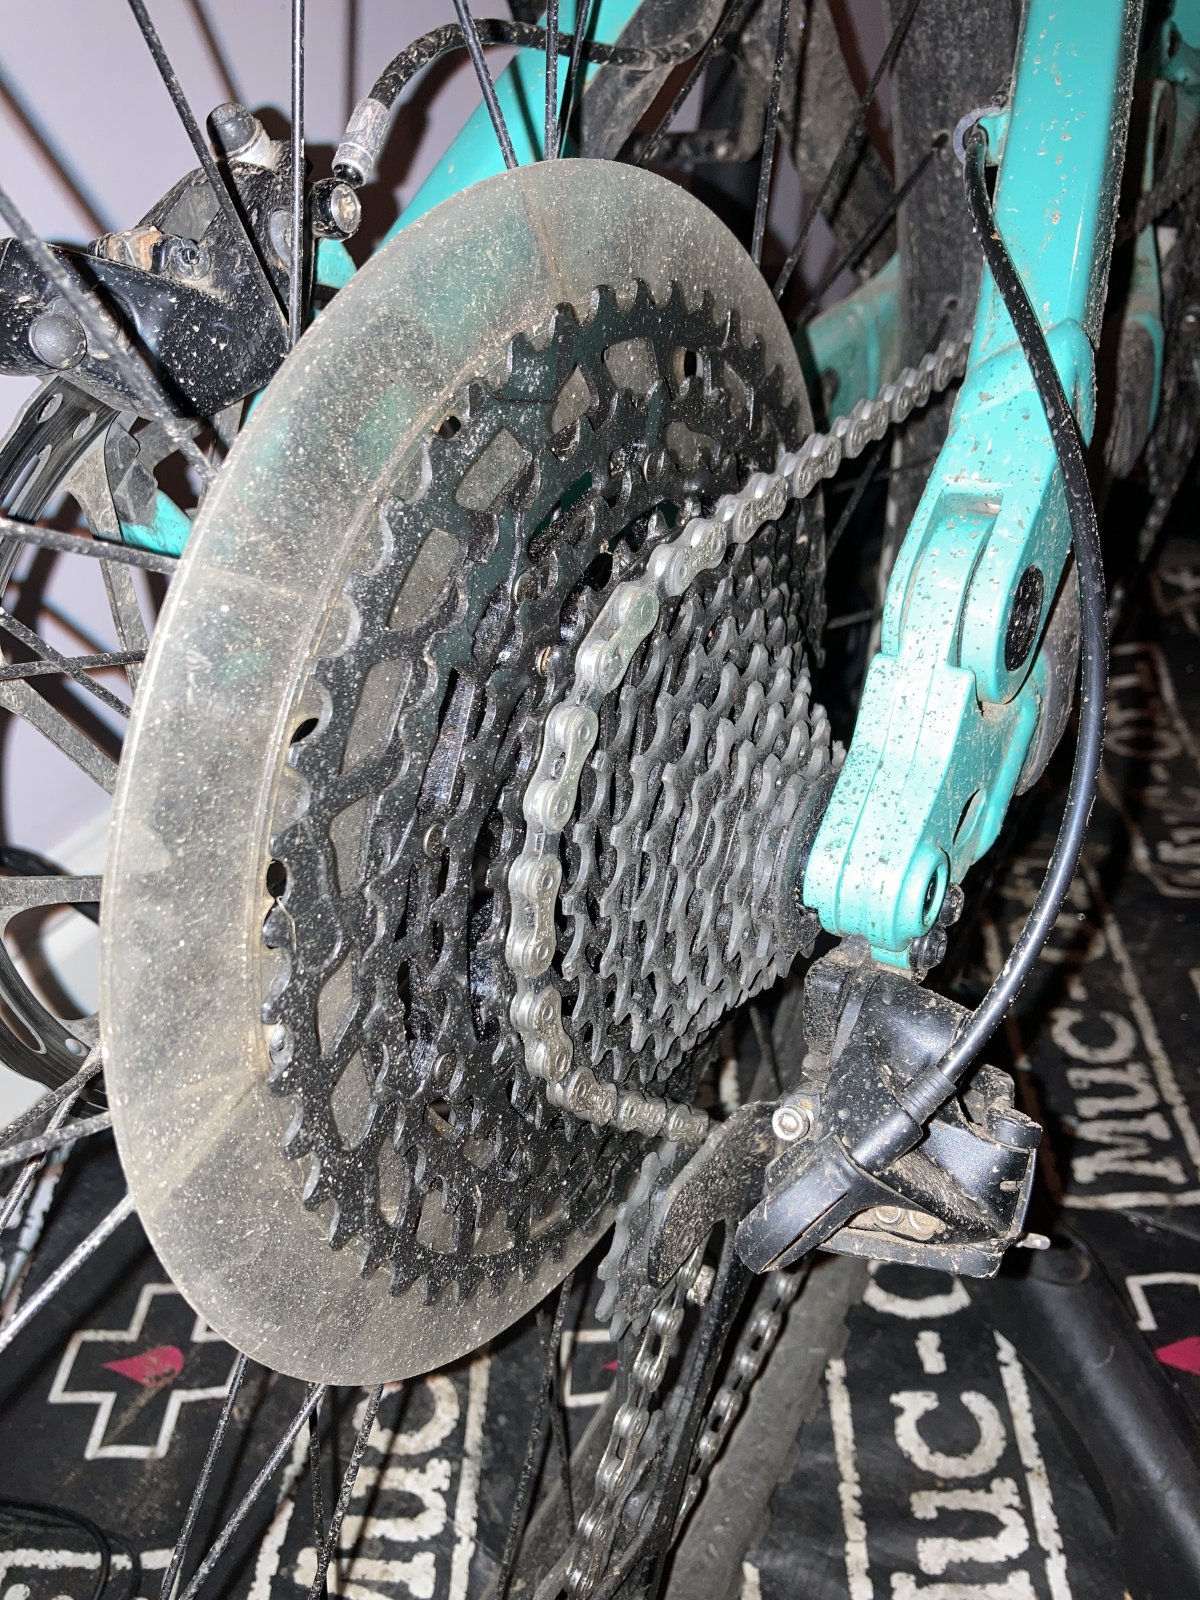 Chain wax leaves chain and sprocket nasty every ride. Normal or is